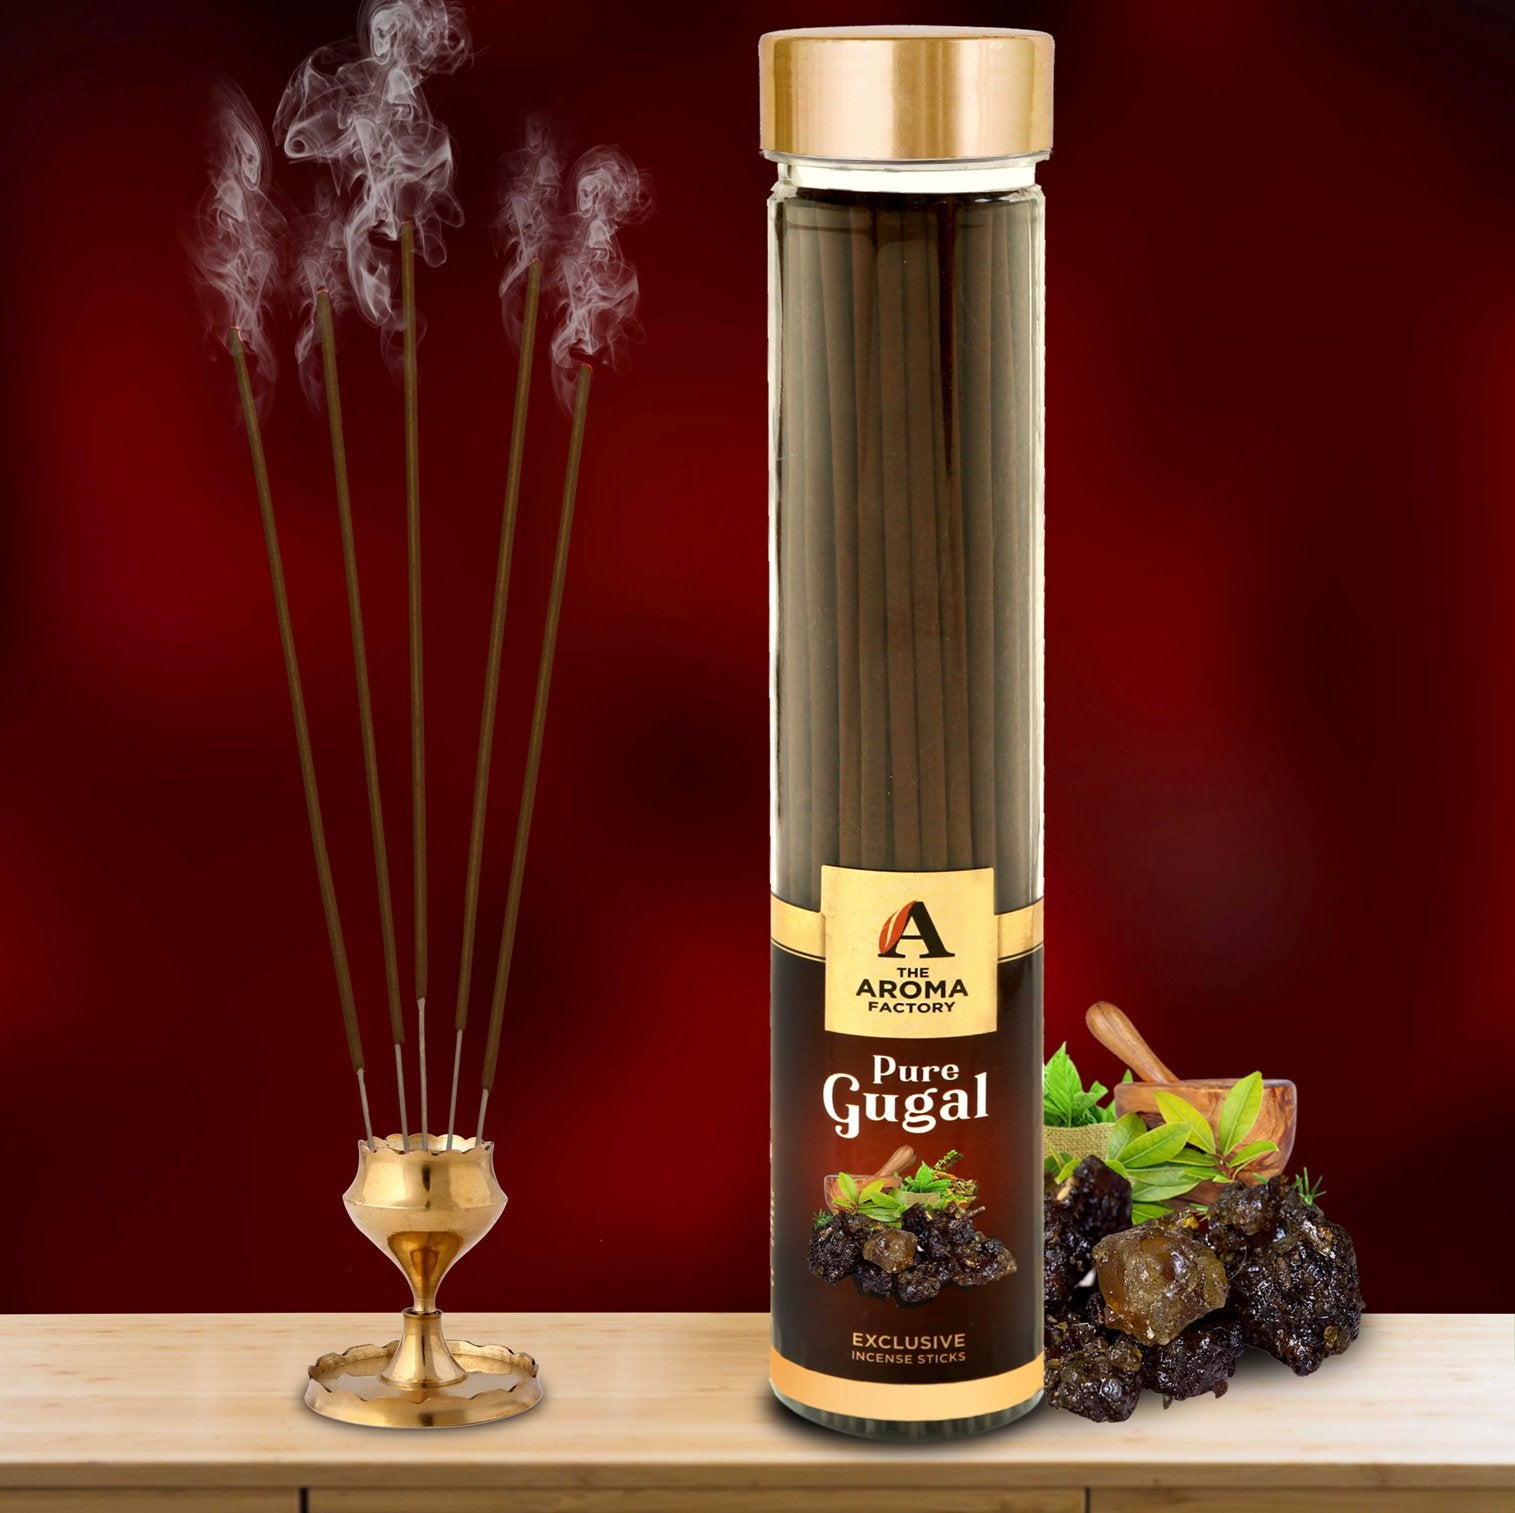 The Aroma Factory Pure Gugal Incense Sticks Agarbatti (Charcoal Free & 100% Herbal) Bottle, 100g